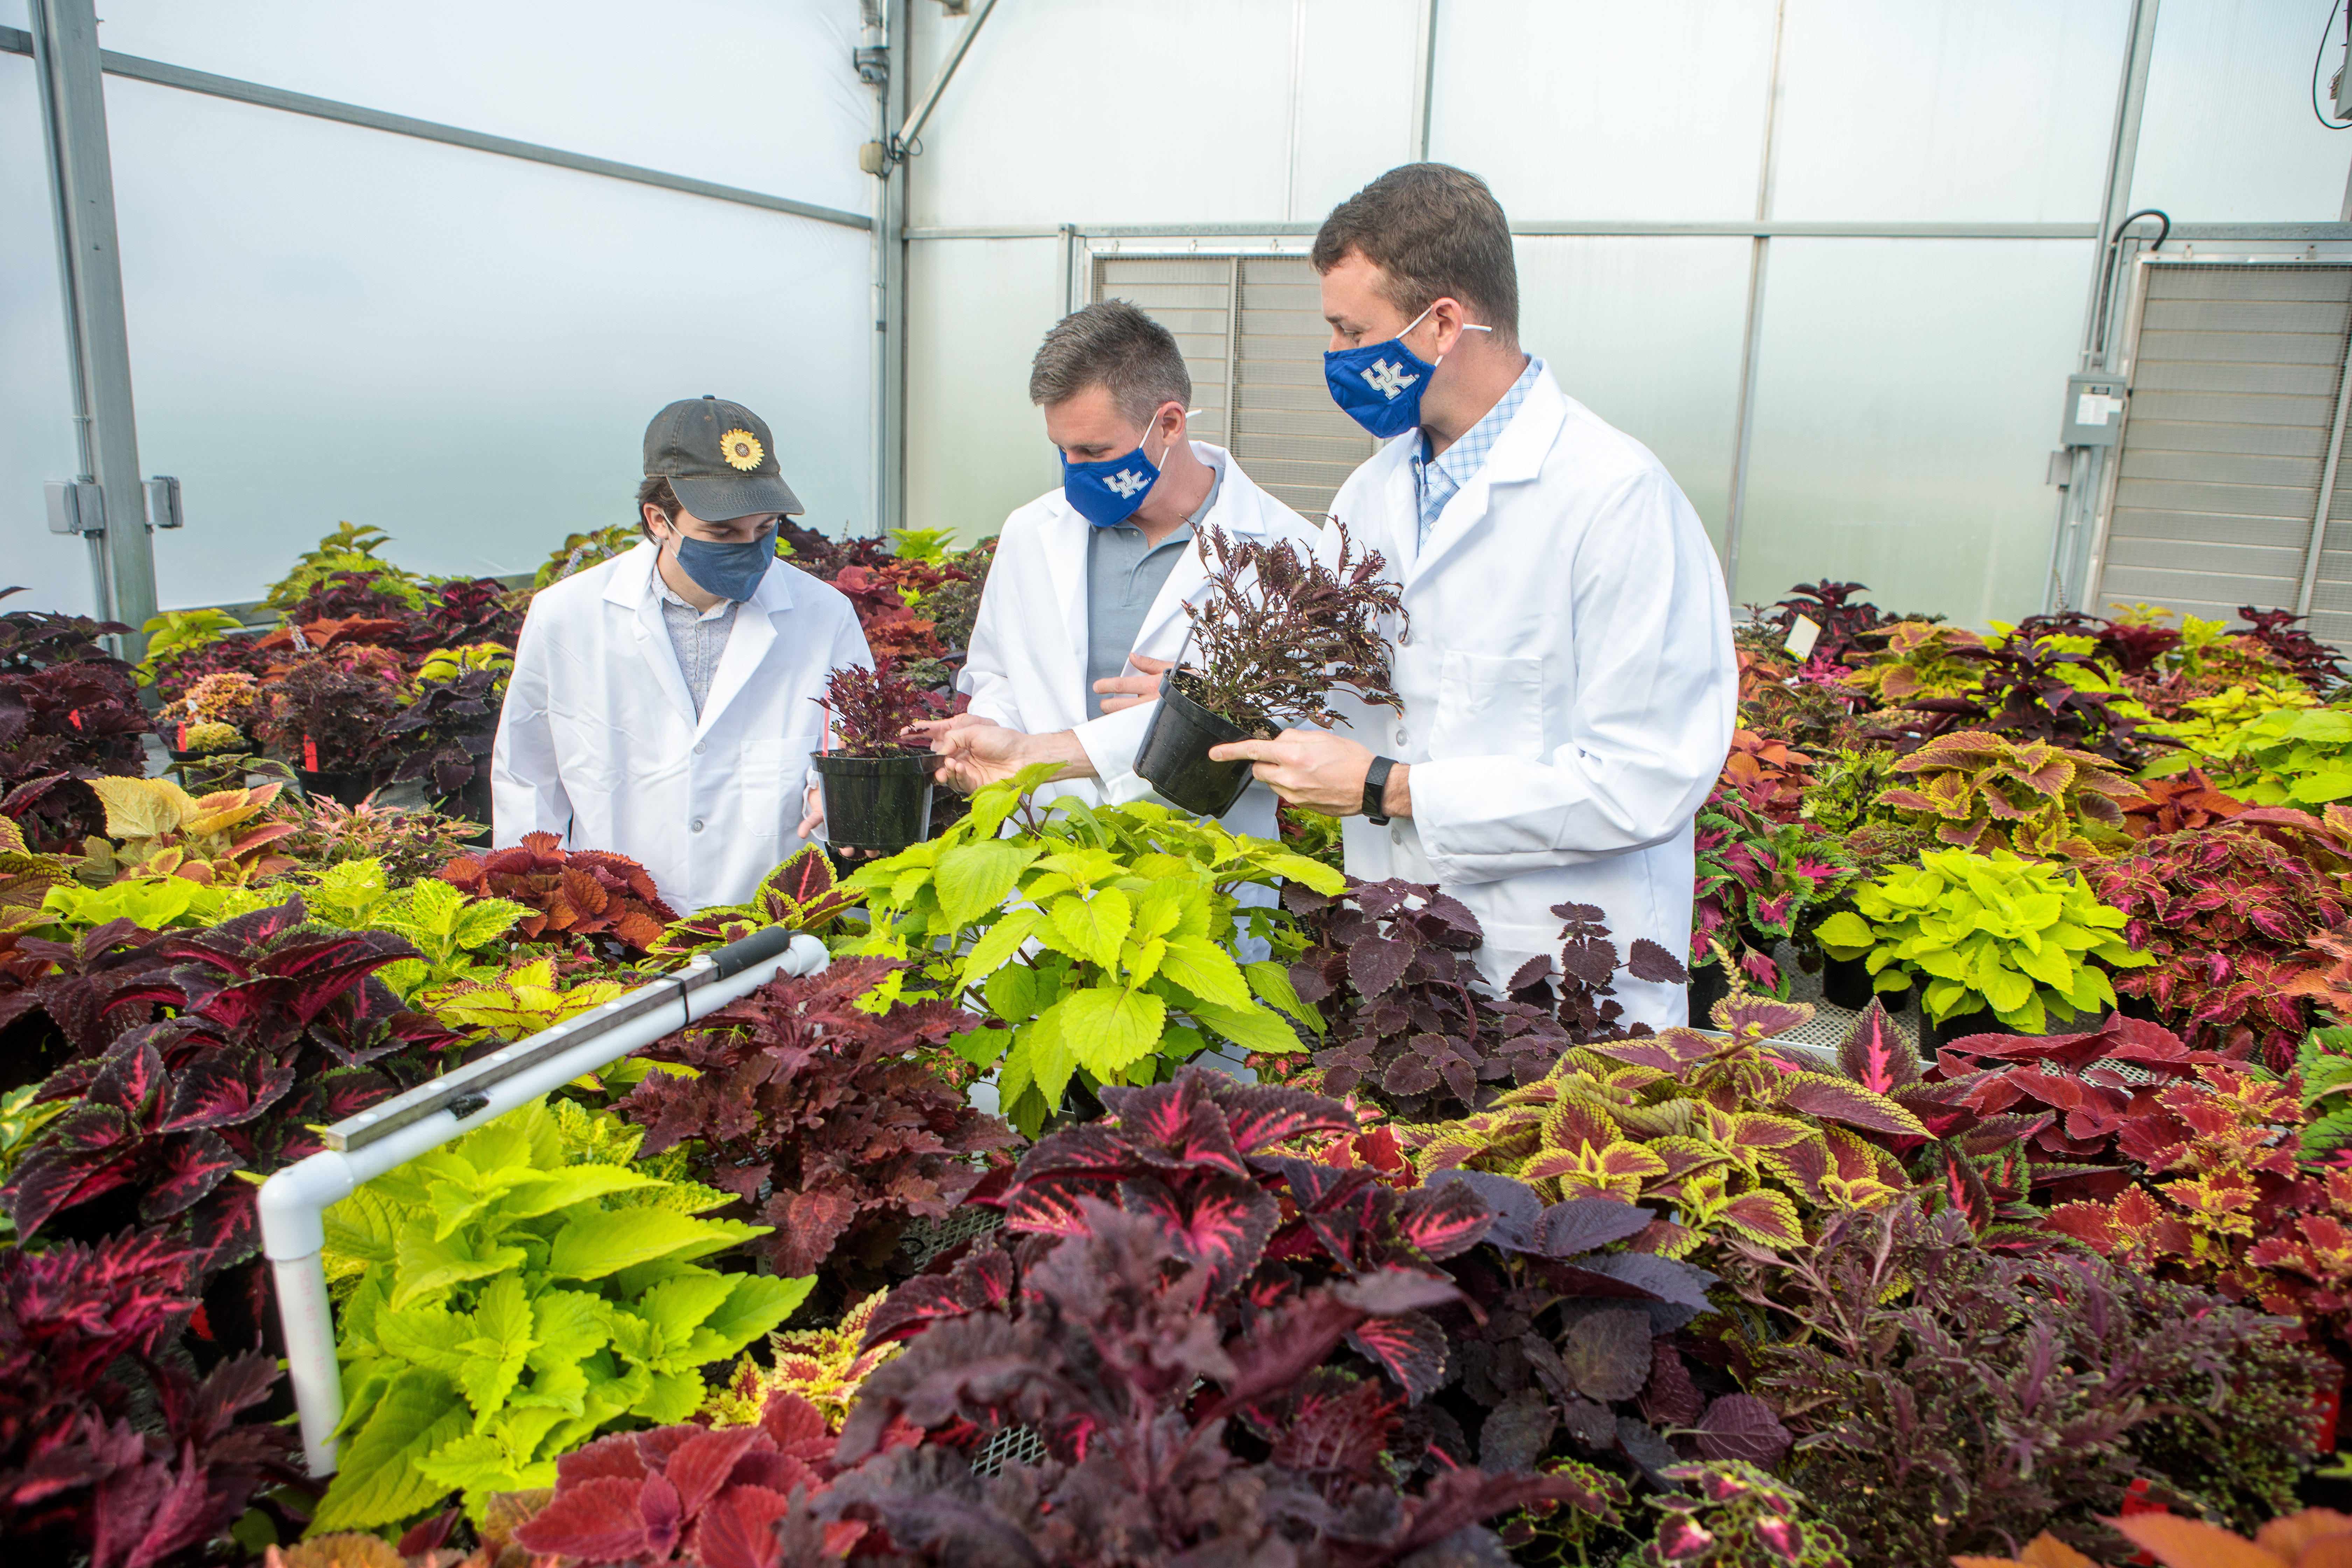 (l-r) Ty Rich, Paul Cockson and Garrett Owen compare notes for a coleus cultivar trial at the UK Horticultural Research Farm. Photo by Matt Barton